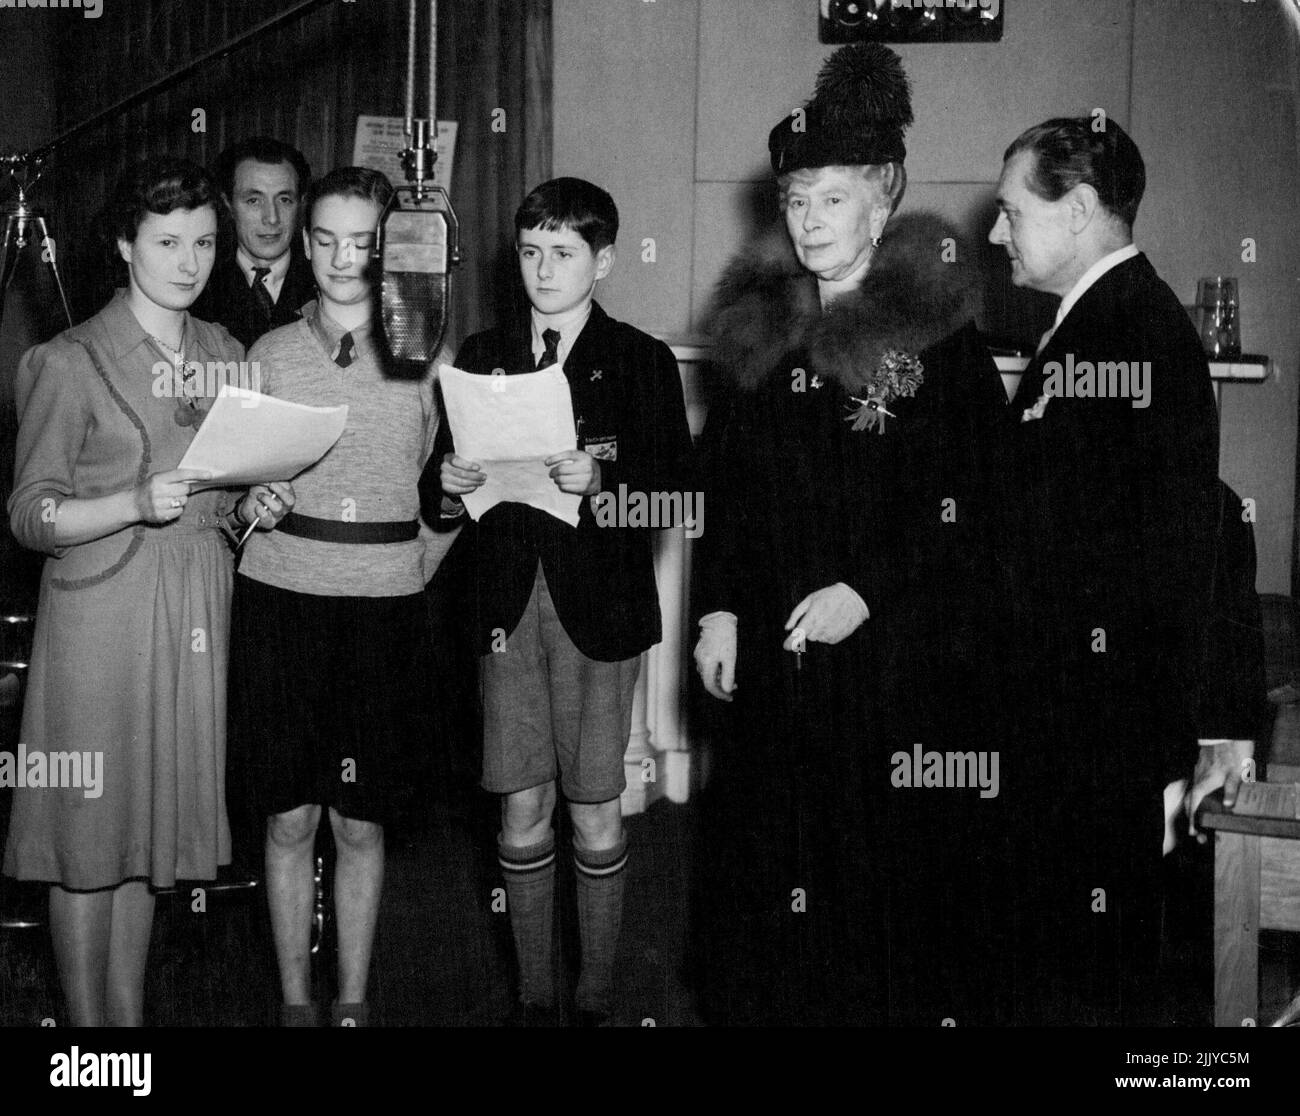 On 25th March, 1943 H.M. Queen Mary paid a visit to Broadcasting House, Bristol, where she saw a schools broadcast transmission, and attended a rehearsal of Ivy Benson's Orchestra, and of the Children's Hour. Queen Mary with Derek McCulloch, at Children's Hour rehearsal of Elizabeth Nesbit's play ' The Railway Children ' - Young players reading from left to right Rosamund Barnes, Jill Andrews, Peter Pullen - with Charles Mason in background. August 09, 1943. (Photo by BBC). Stock Photo